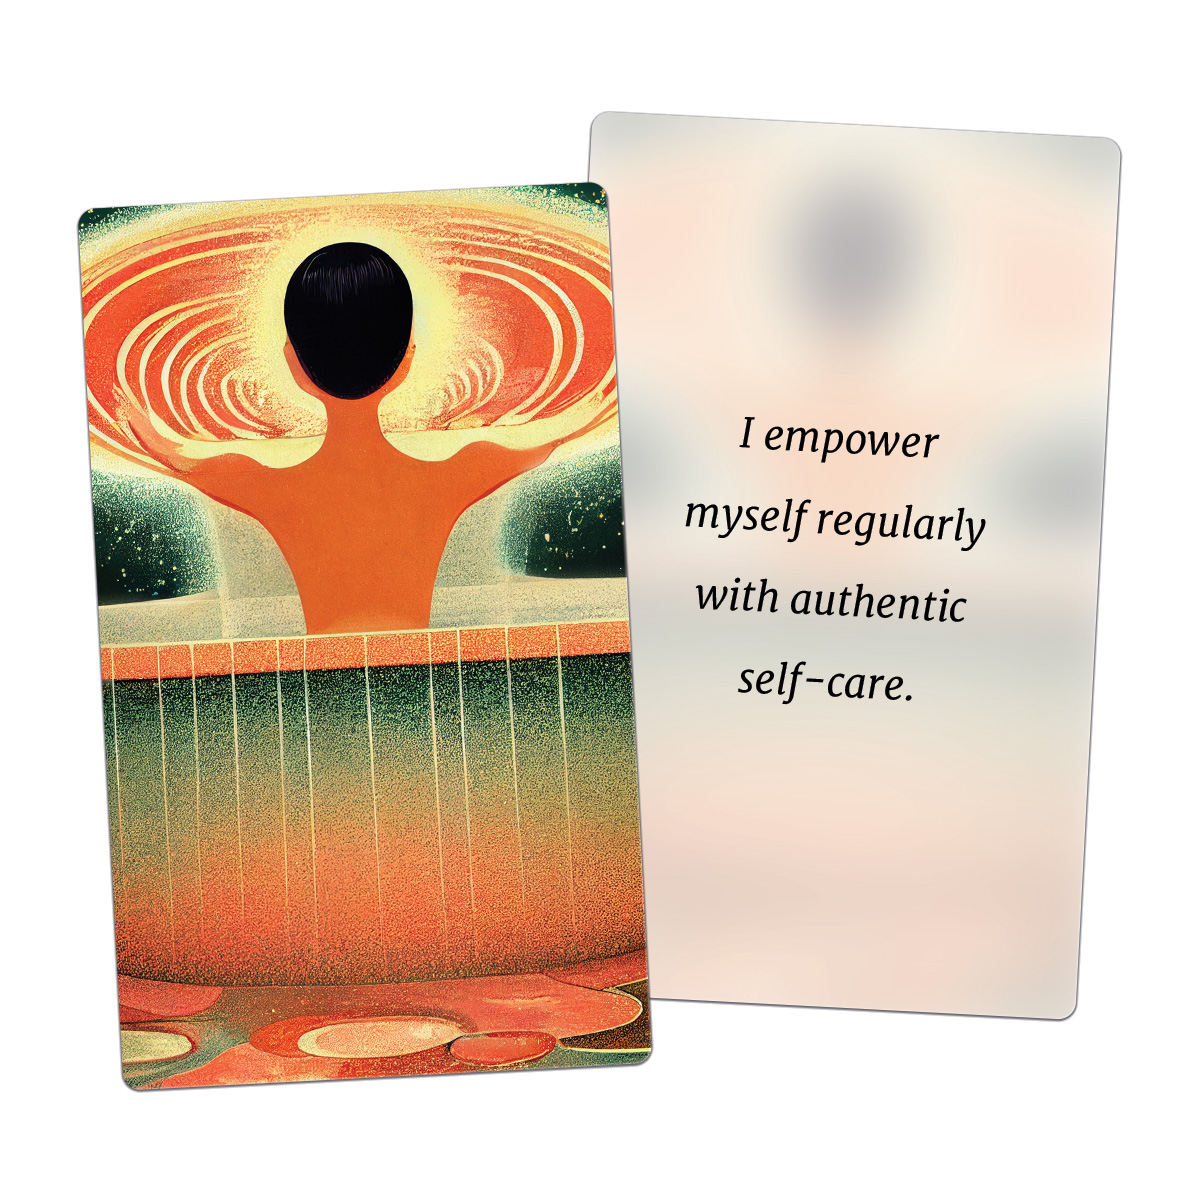 I empower myself regularly with authentic self-care. (AFFIRMATION CARD)